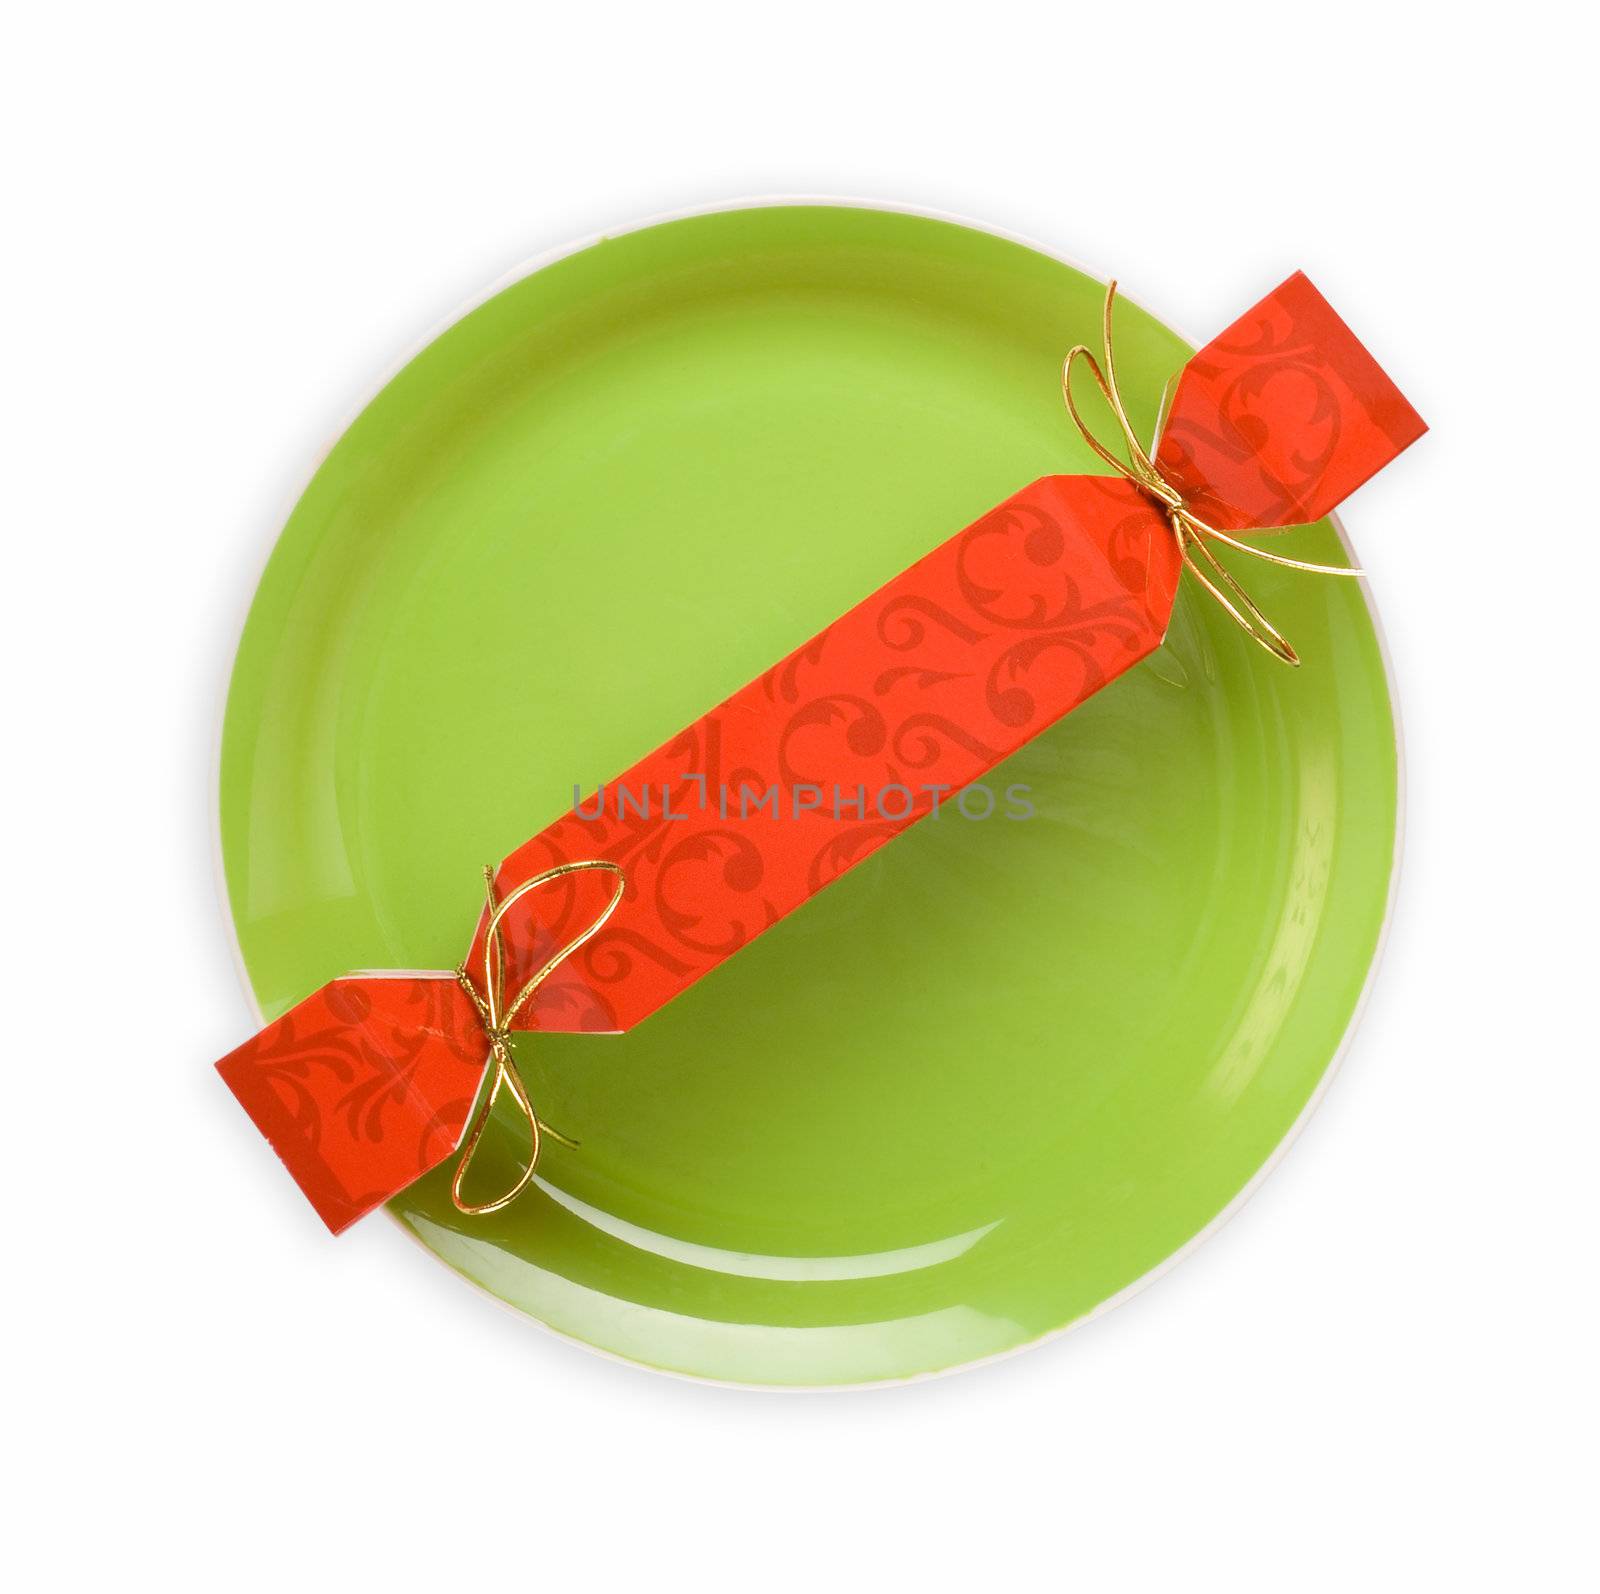 Christmas or party cracker on green dinner plate